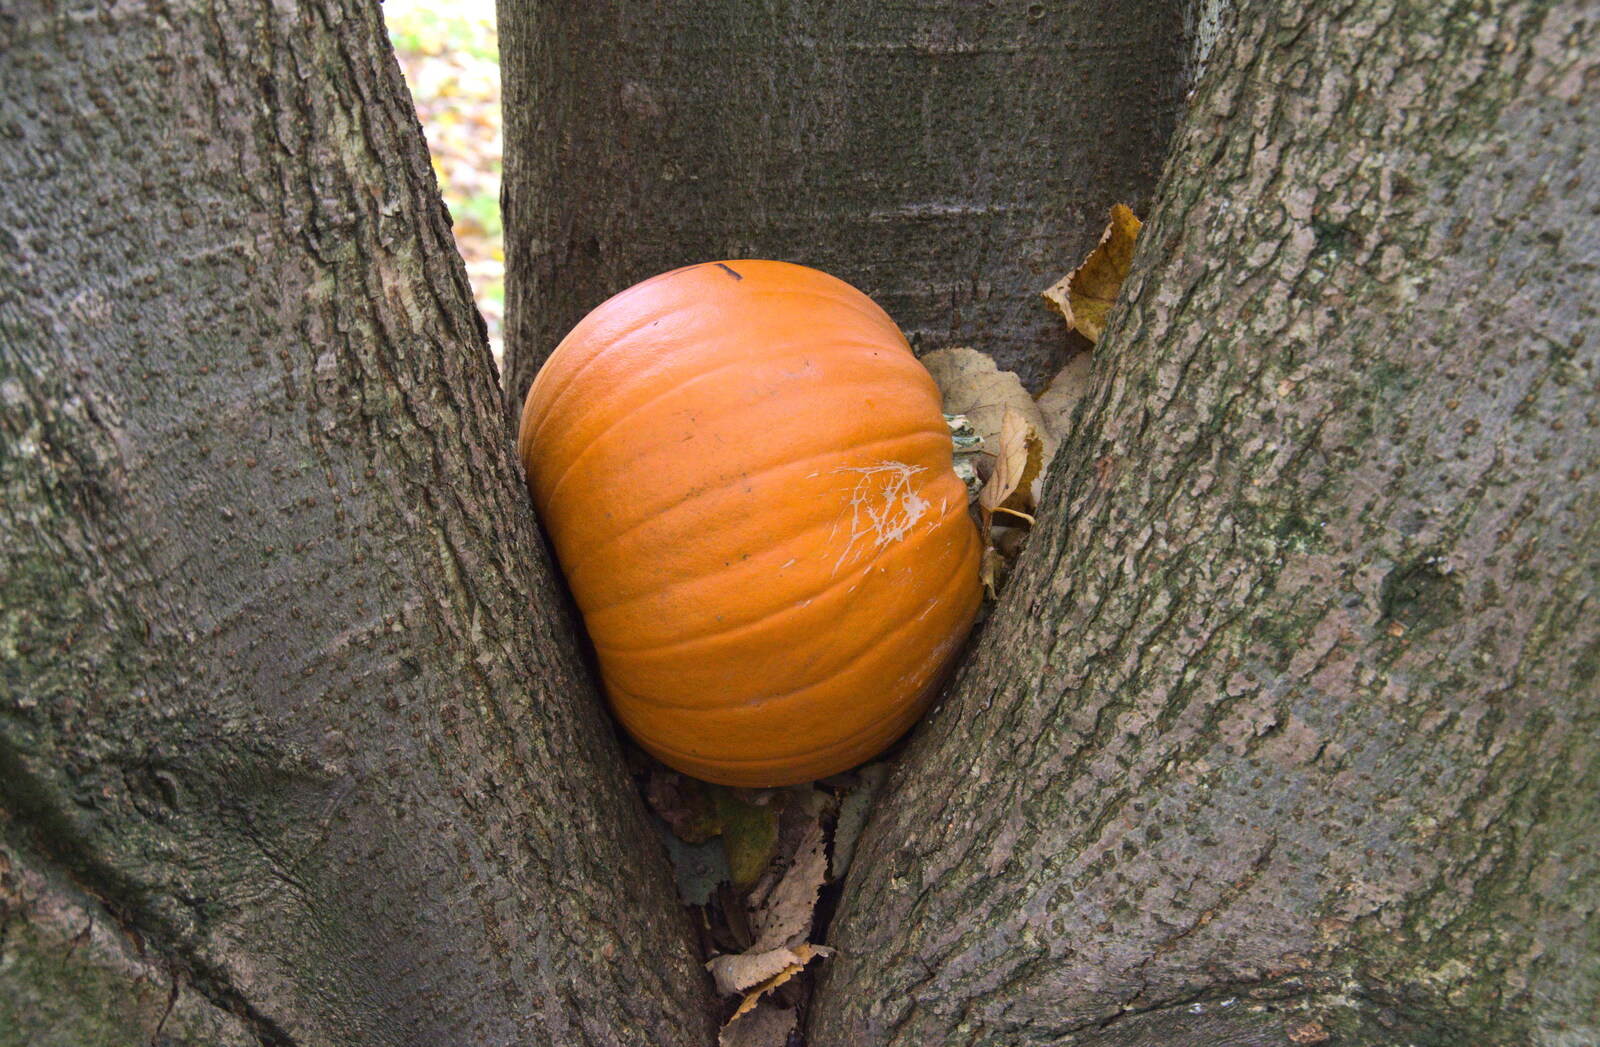 We come across a pumpkin wedged into a tree from A Trip to Lynford Arboretum, Mundford, Norfolk - 30th October 2020